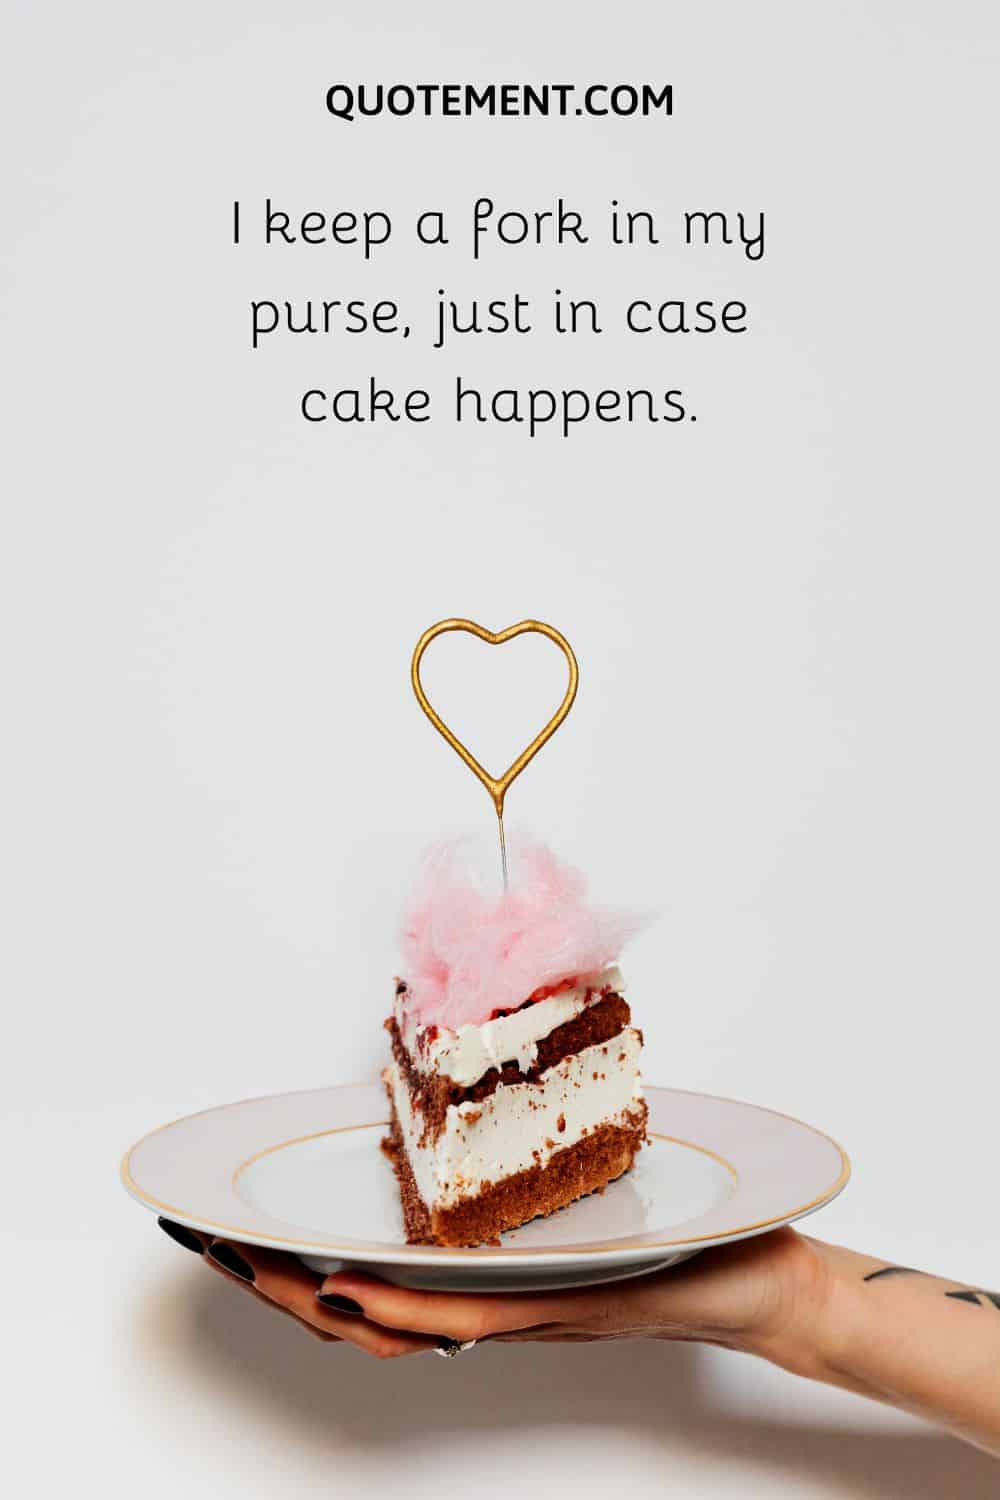 I keep a fork in my purse, just in case cake happens